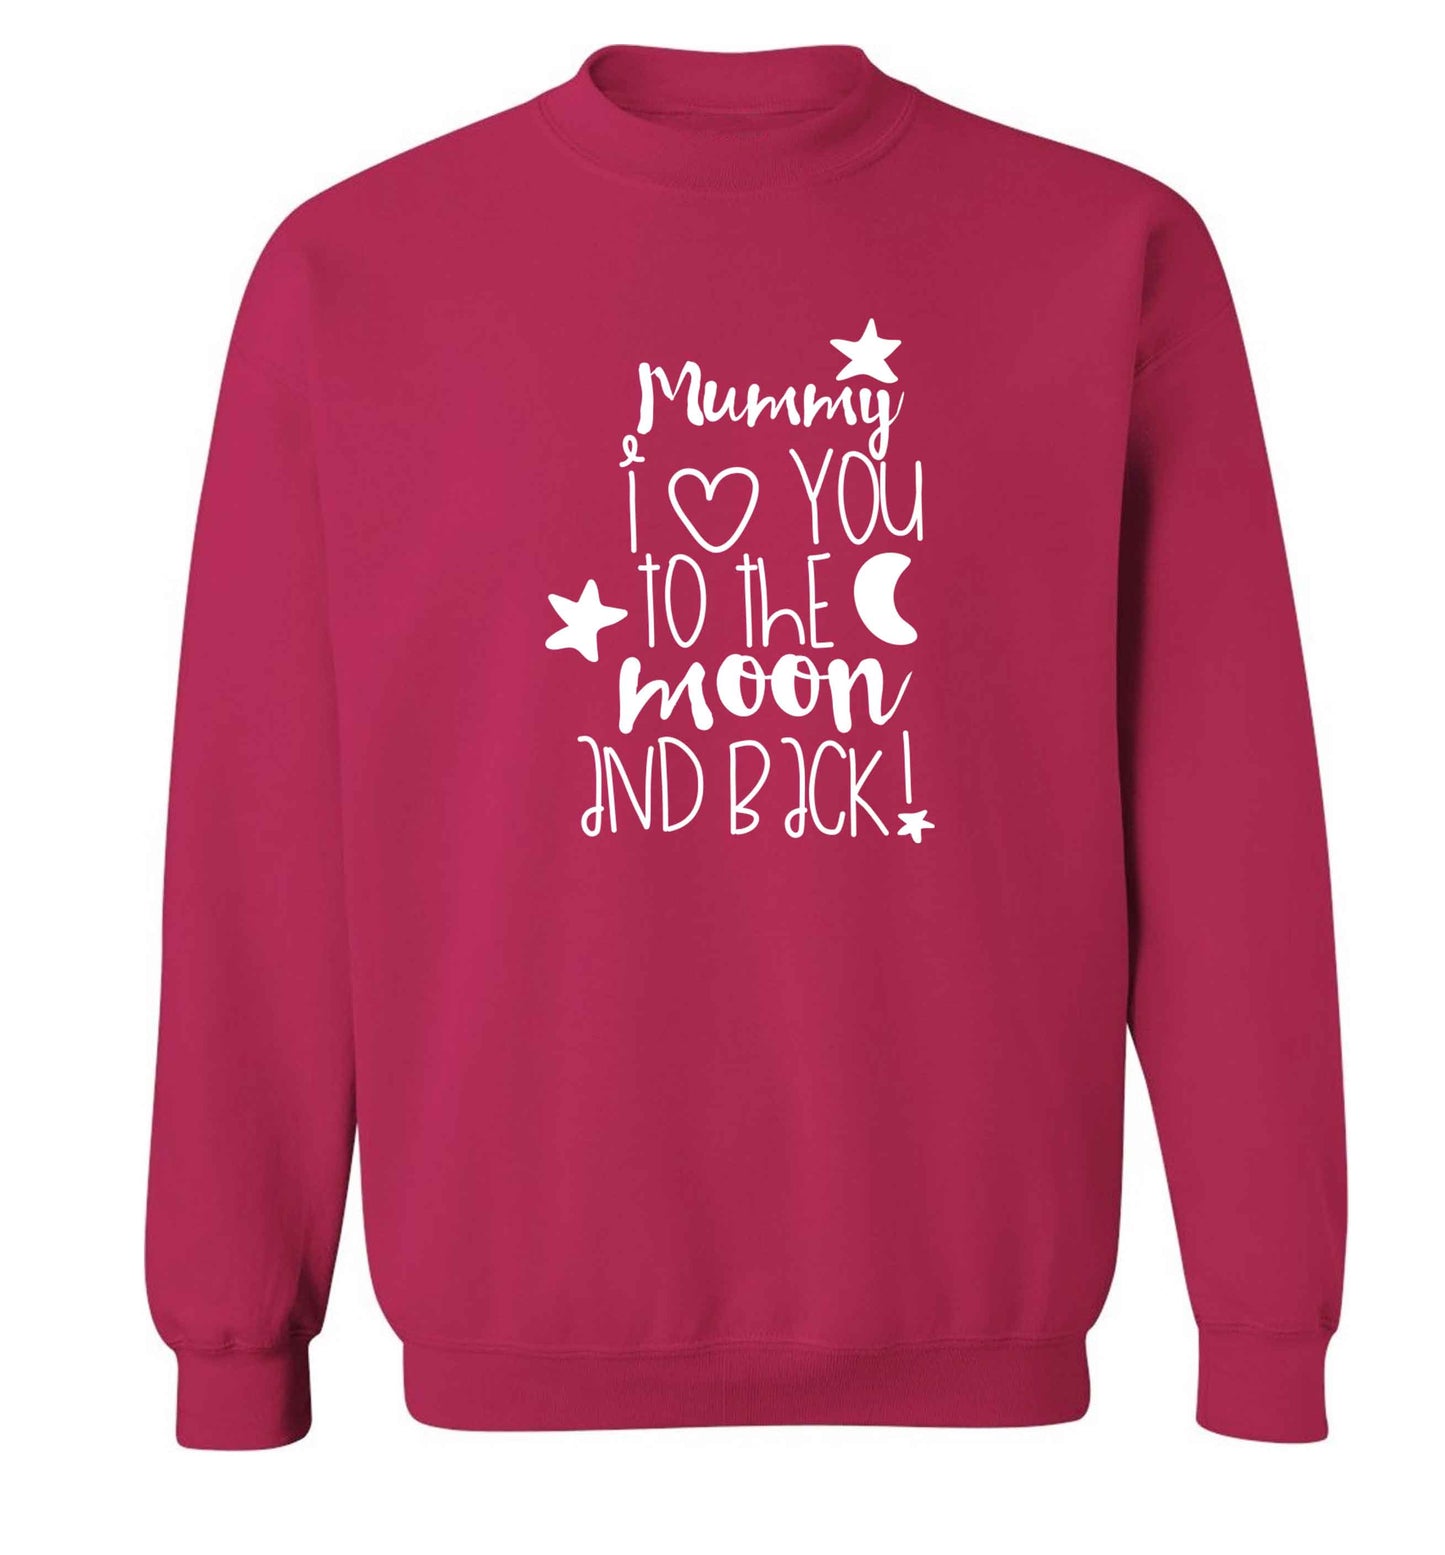 Mummy I love you to the moon and back adult's unisex pink sweater 2XL